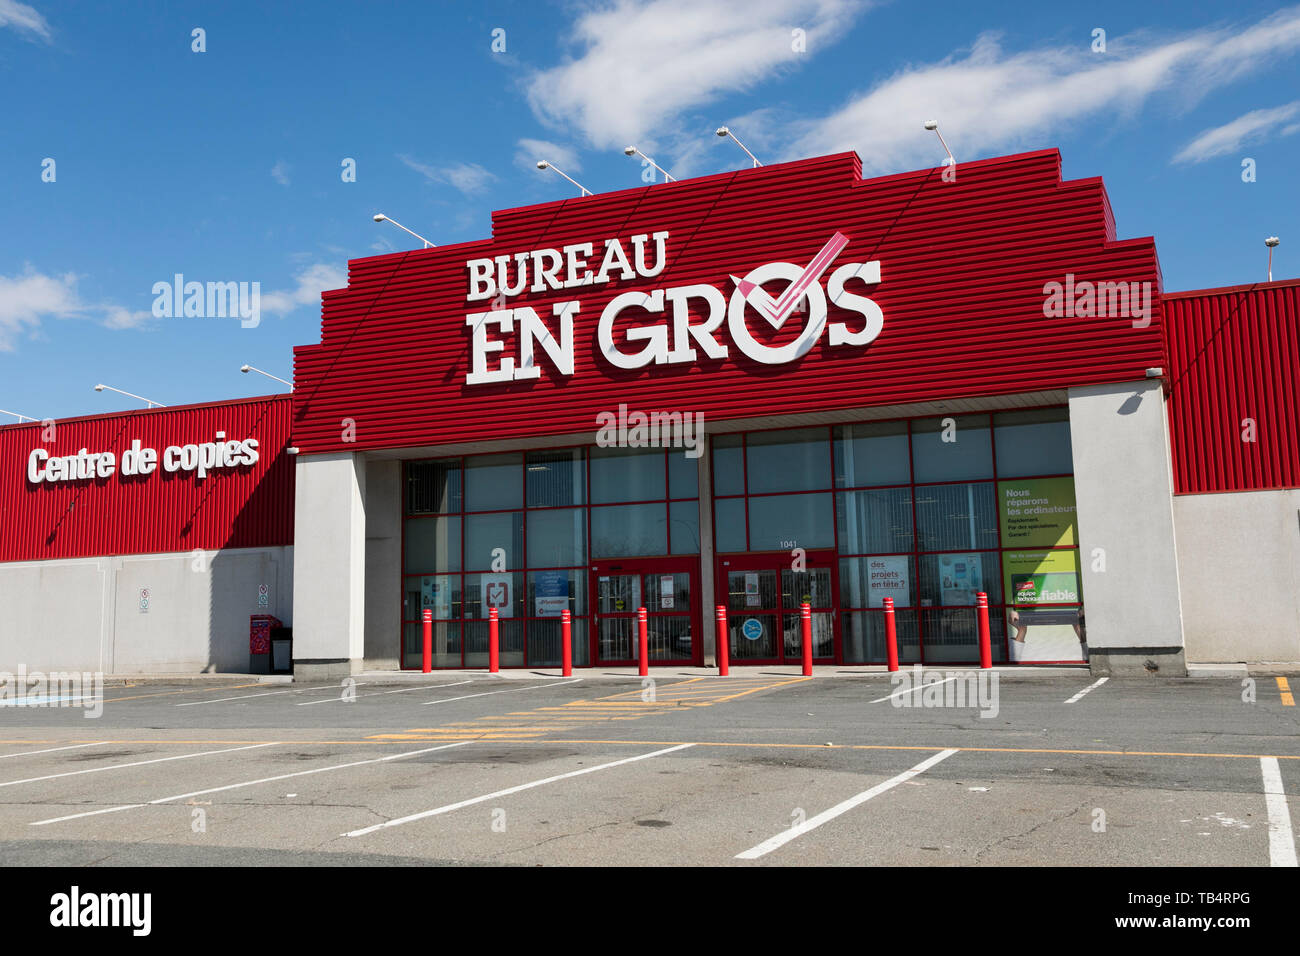 A logo sign outside of a Bureau en Gros (Staples) retail store location in  Montreal, Quebec, Canada, on April 21, 2019 Stock Photo - Alamy